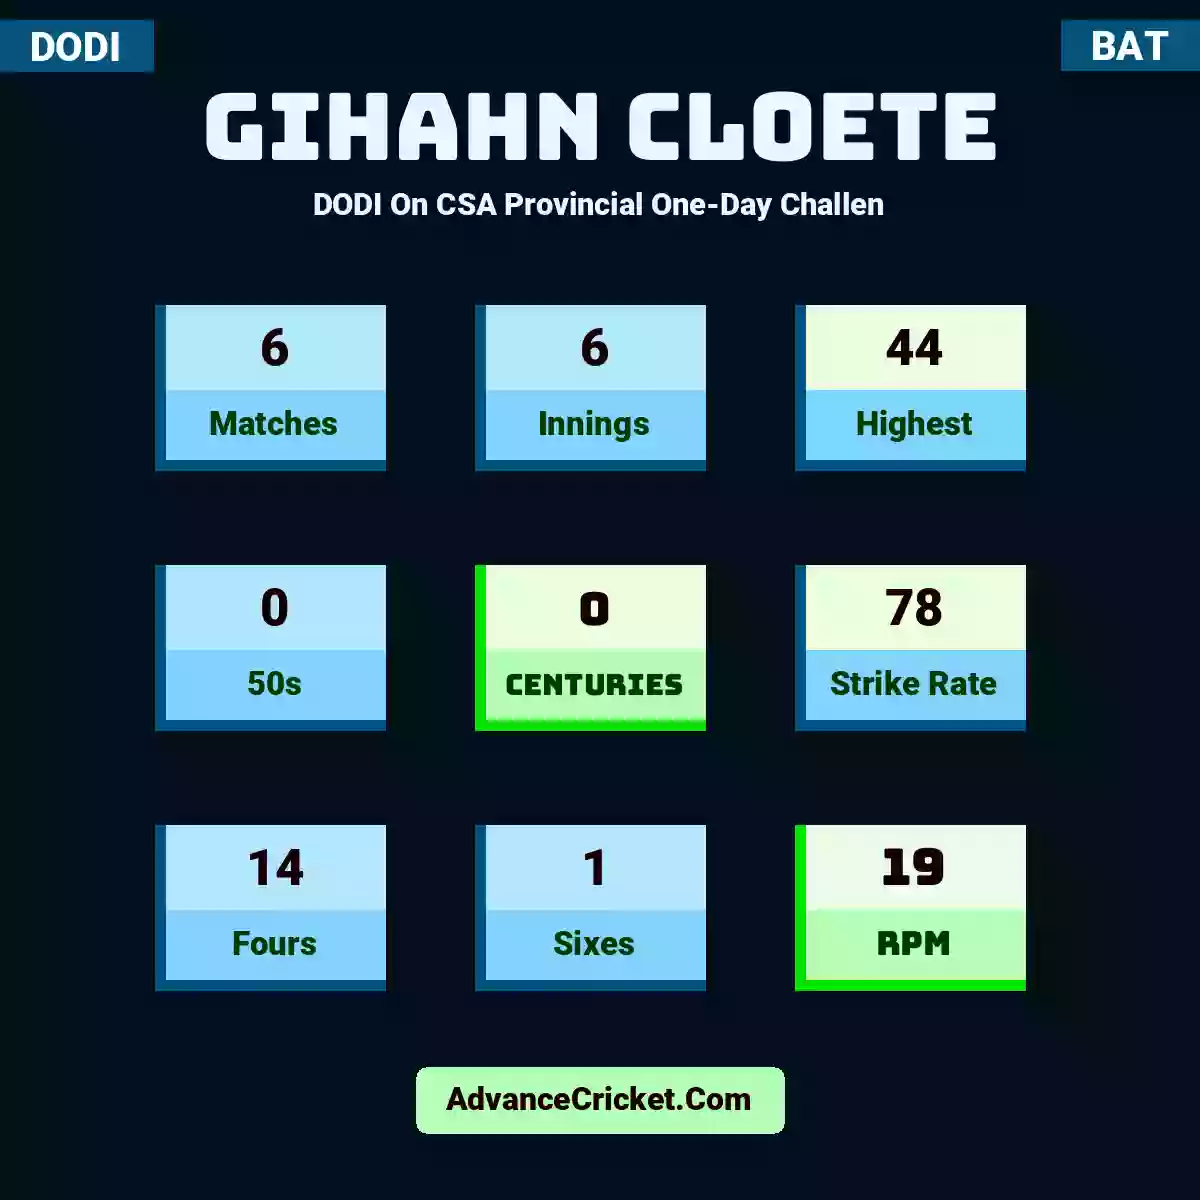 Gihahn Cloete DODI  On CSA Provincial One-Day Challen, Gihahn Cloete played 6 matches, scored 44 runs as highest, 0 half-centuries, and 0 centuries, with a strike rate of 78. G.Cloete hit 14 fours and 1 sixes, with an RPM of 19.